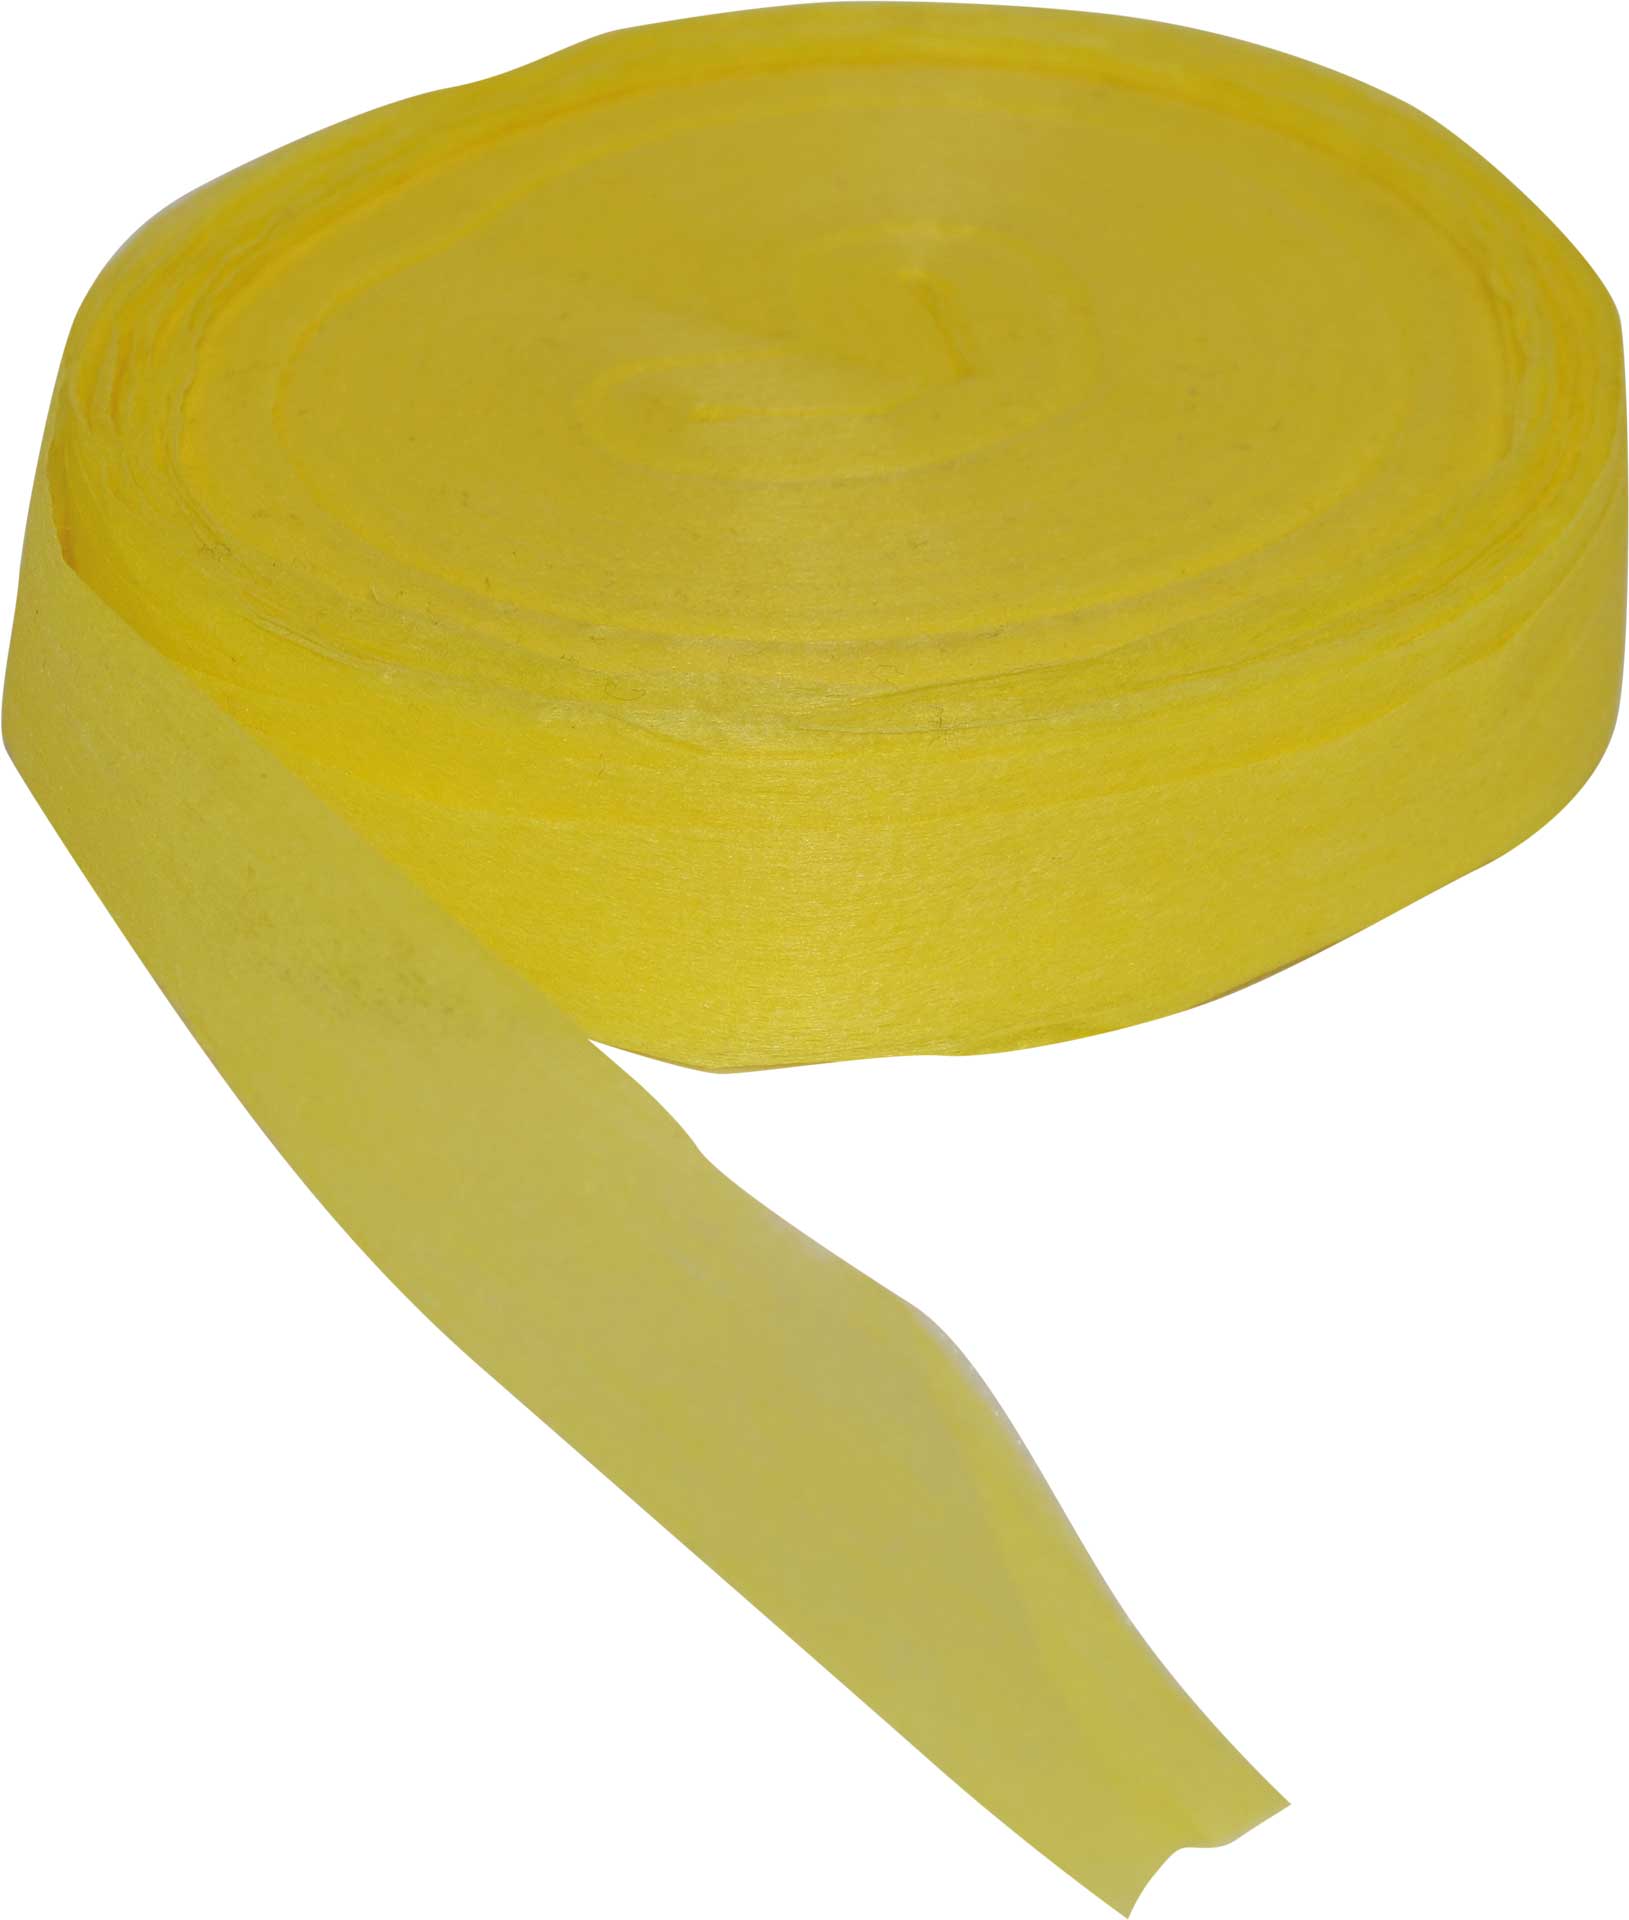 Robbe Modellsport Ribbons for Wingo 2 in the colors yellow approx. 75m